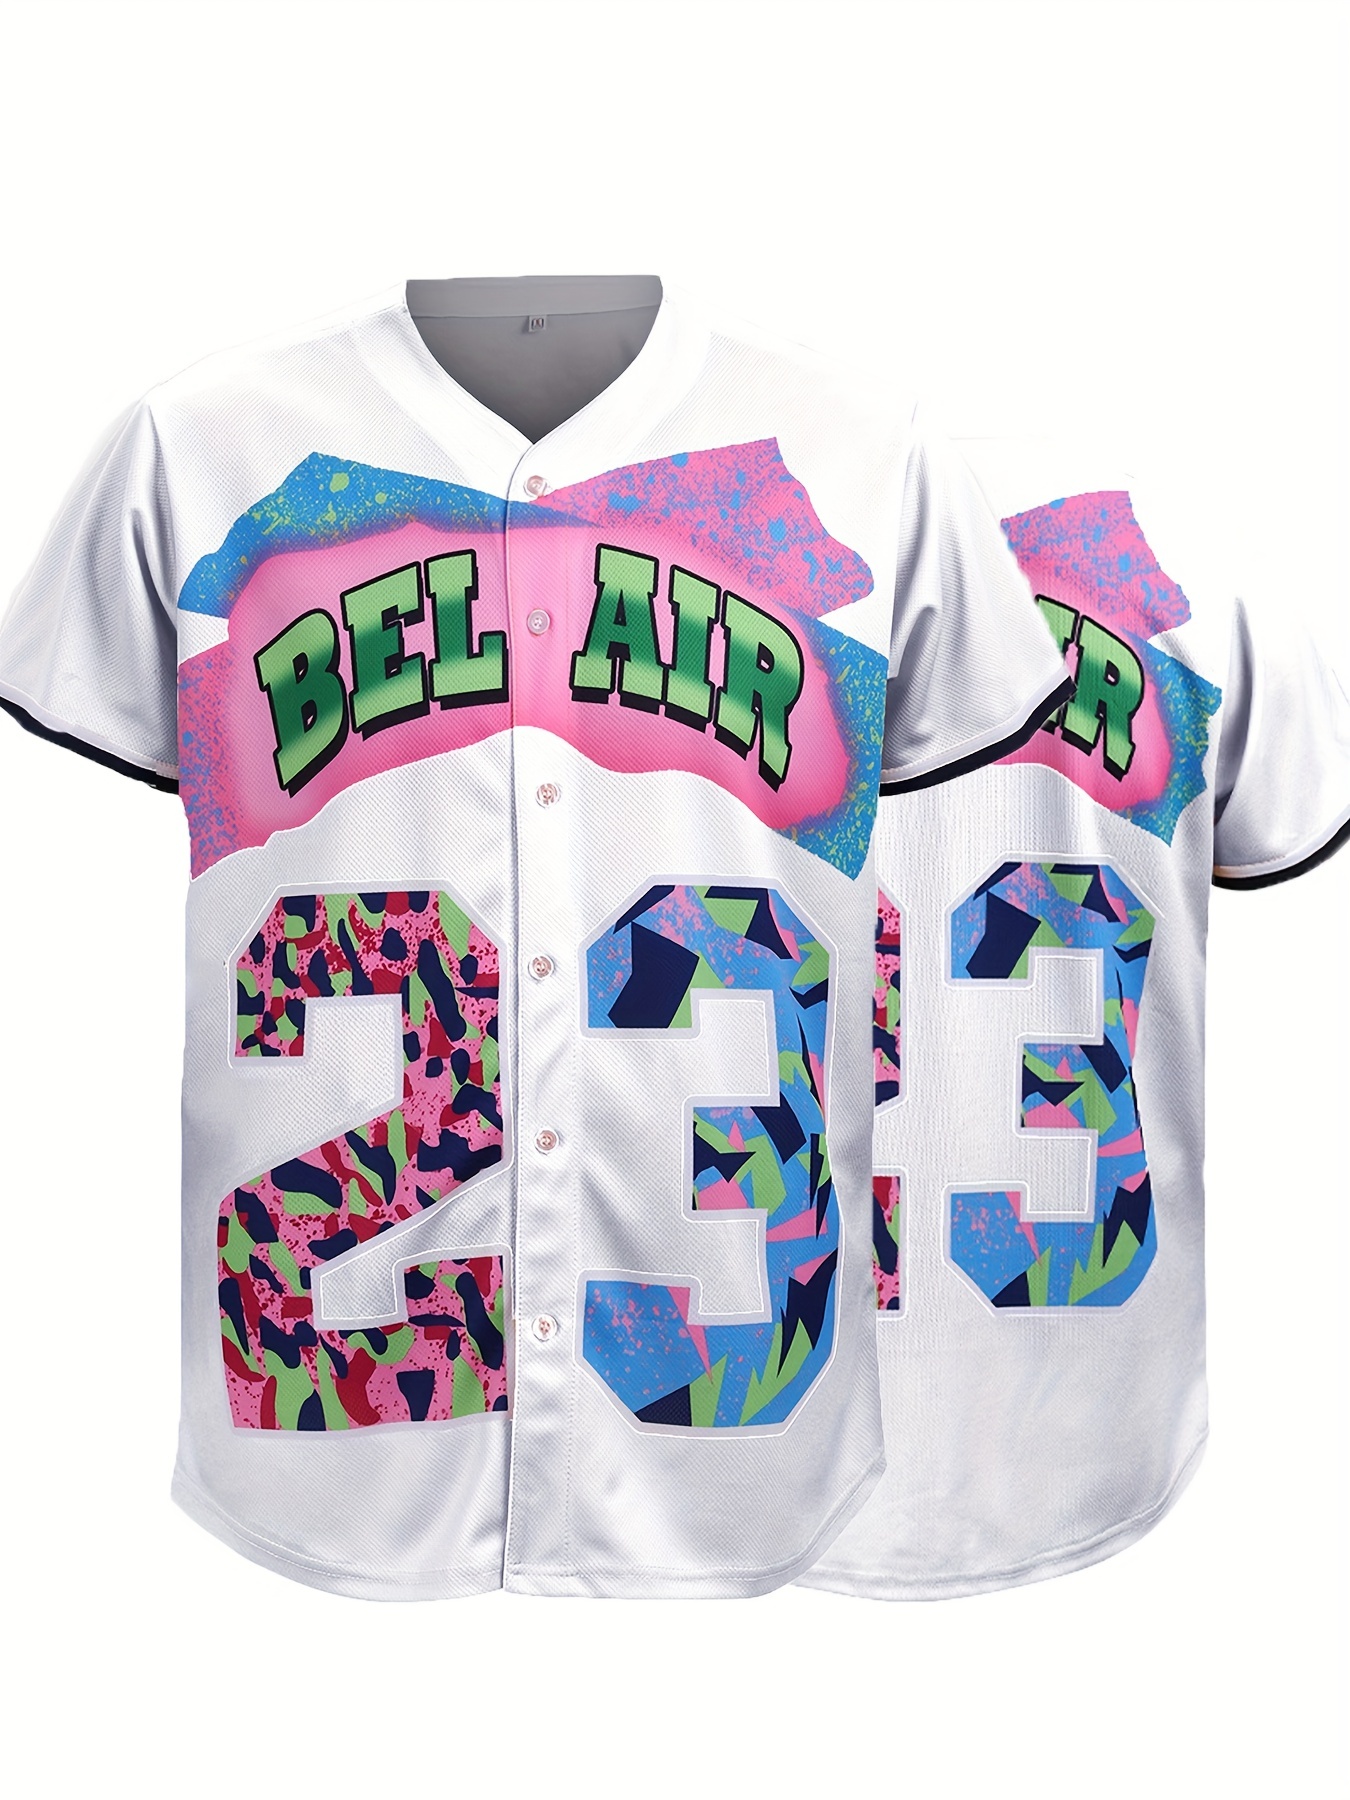 Men's Bel Air #24 Baseball Jersey, 90's City Theme Party Clothing